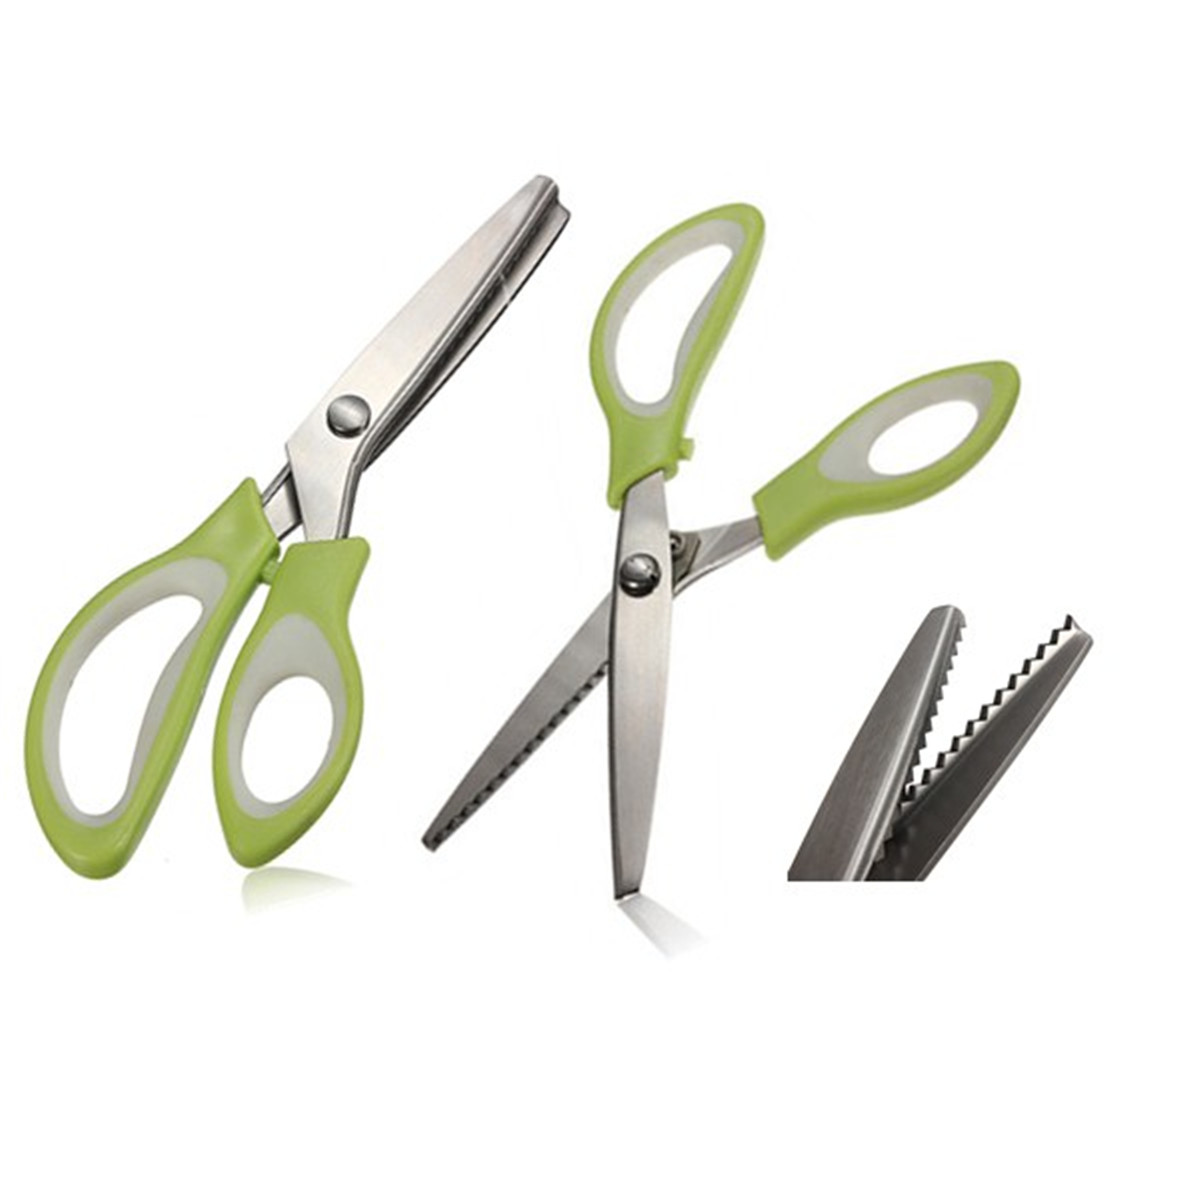 Find Professional Stainless Steel Pinking Shear Tailor Sew Cloth Making Scissors Tool for Sale on Gipsybee.com with cryptocurrencies